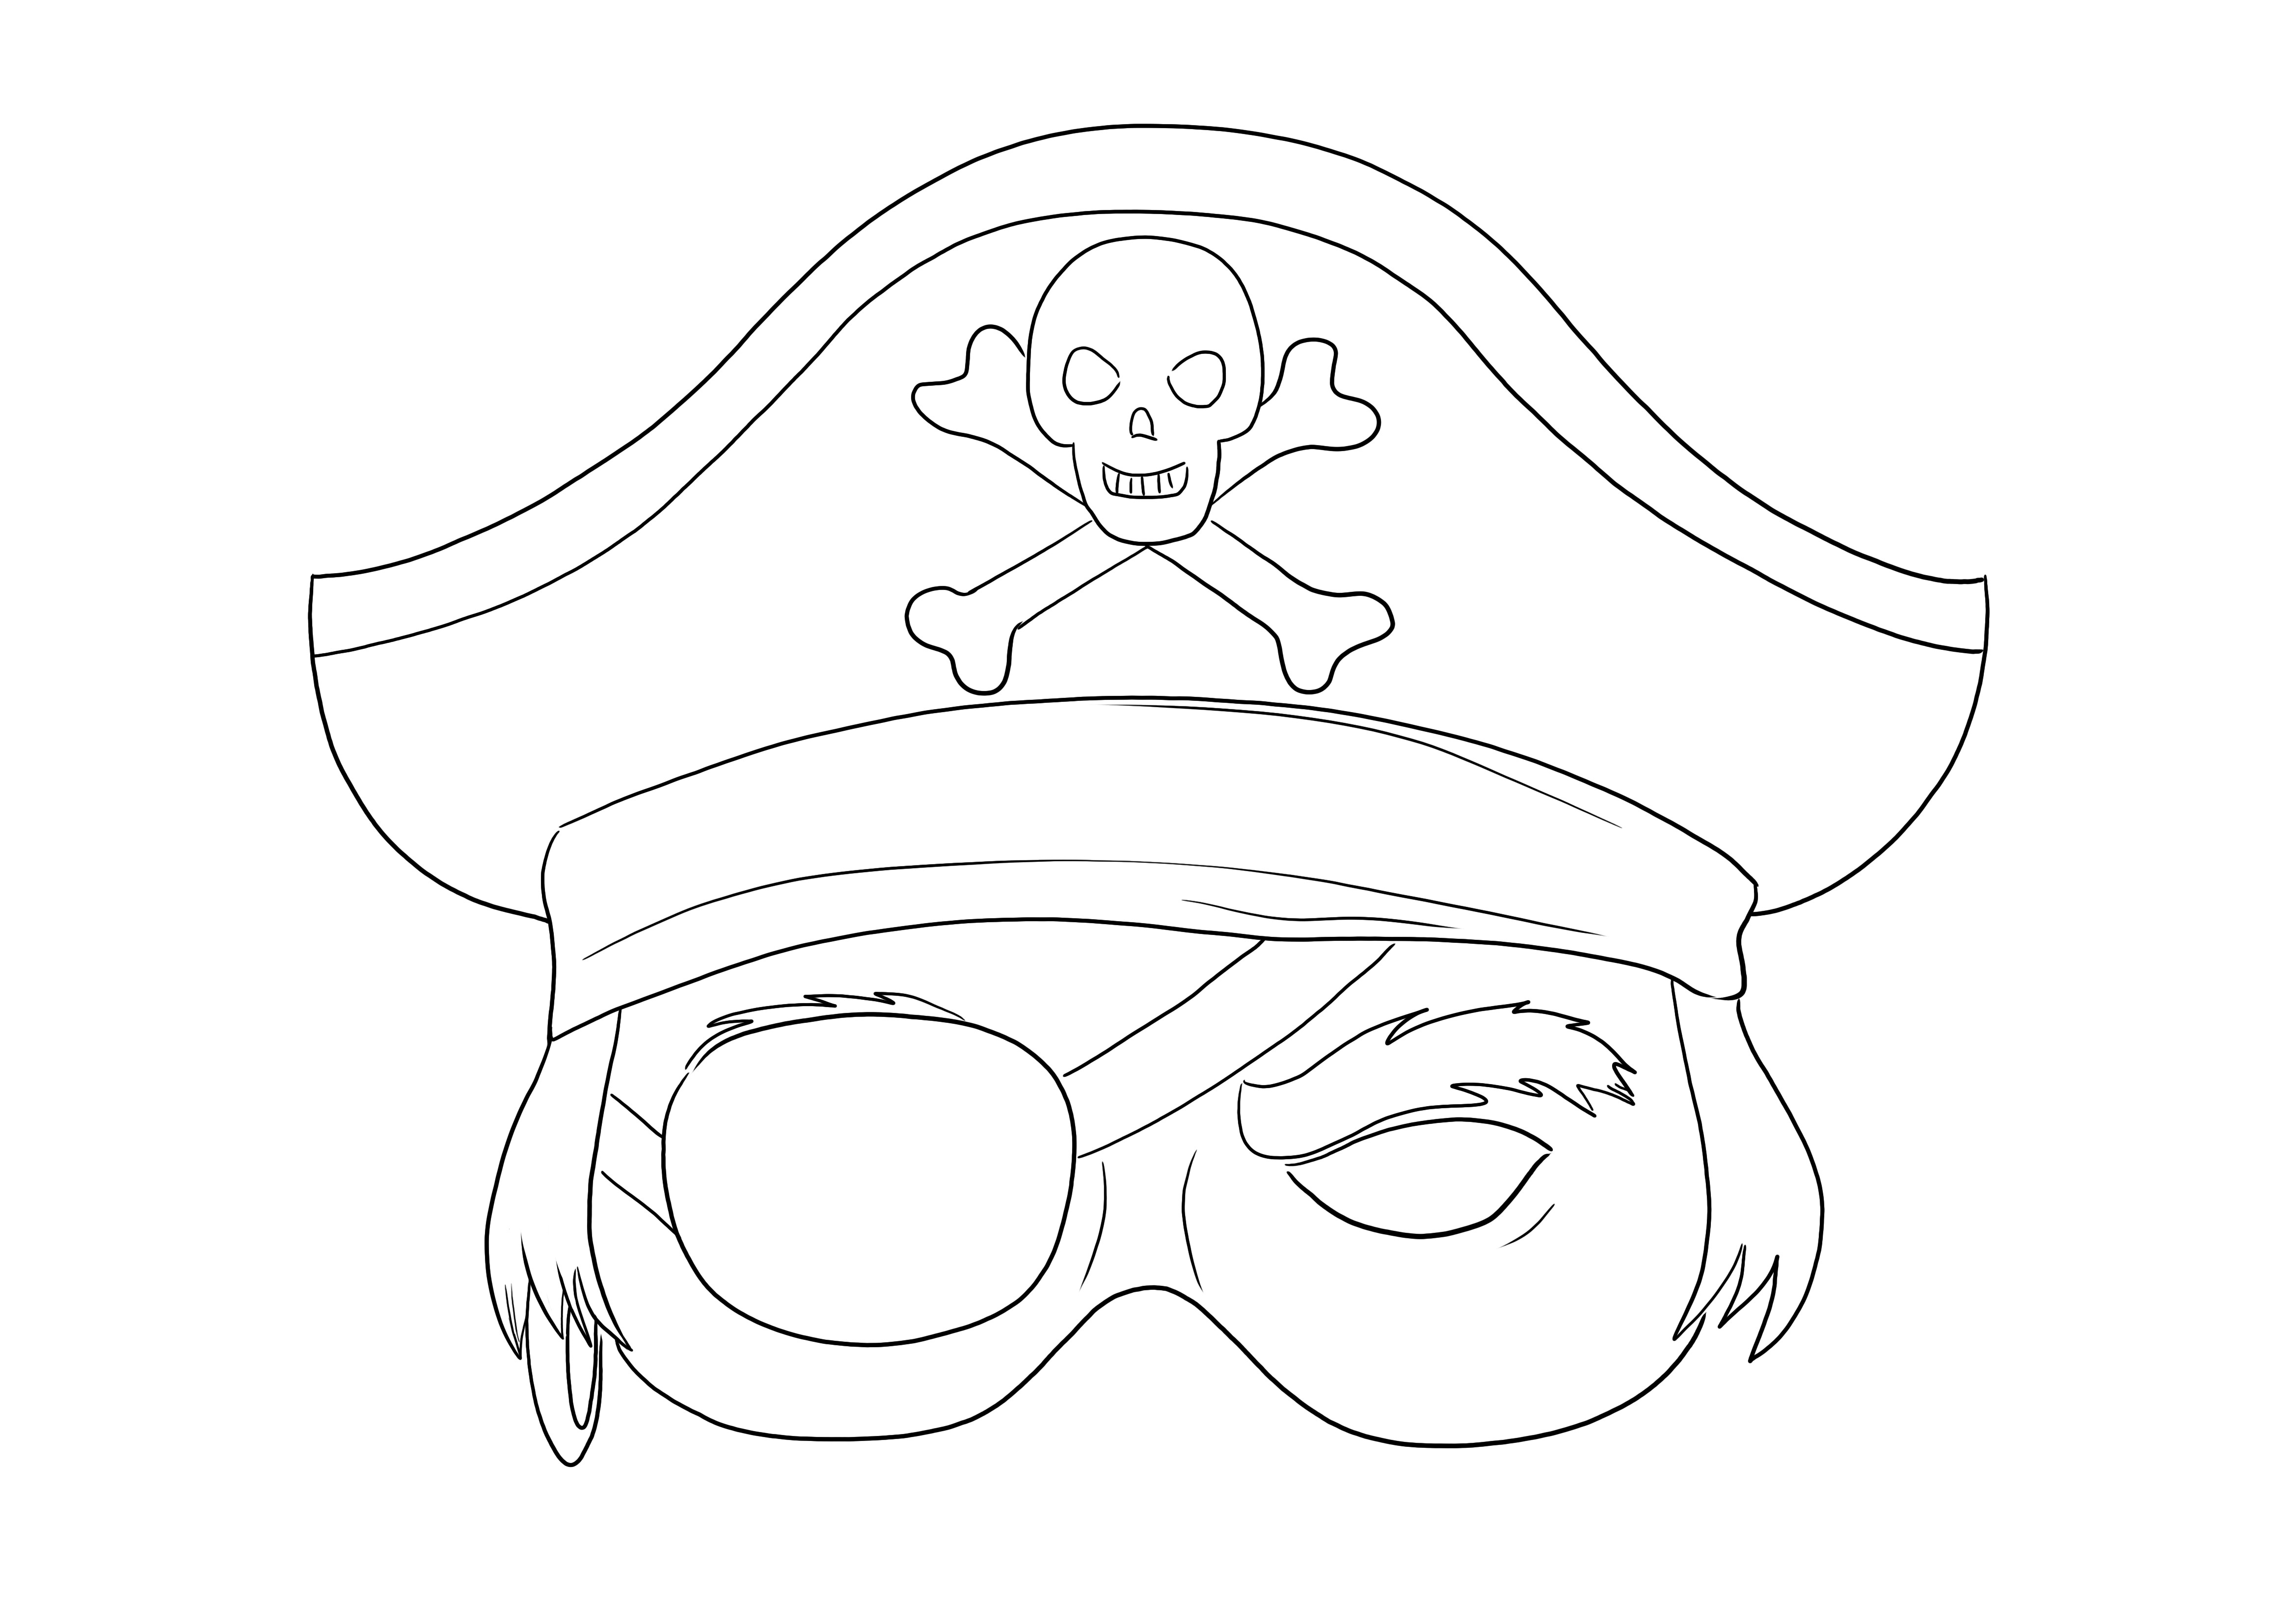 Pirate Mask coloring sheet for free printing or downloading